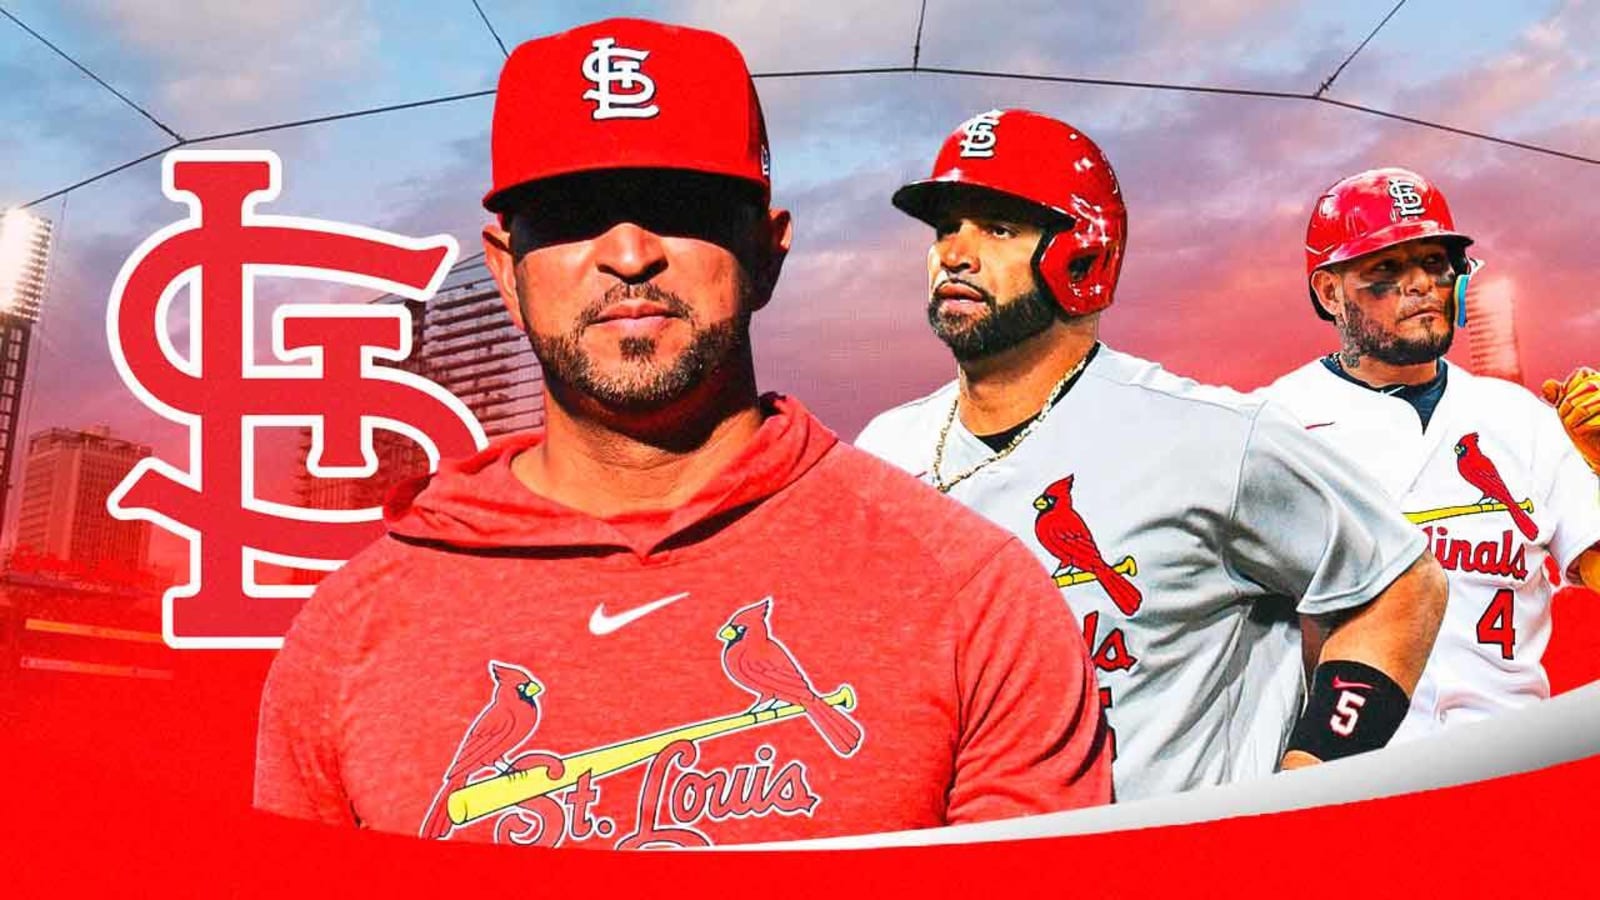  Could Albert Pujols or Yadier Molina replace Oli Marmol as Cardinals manager?